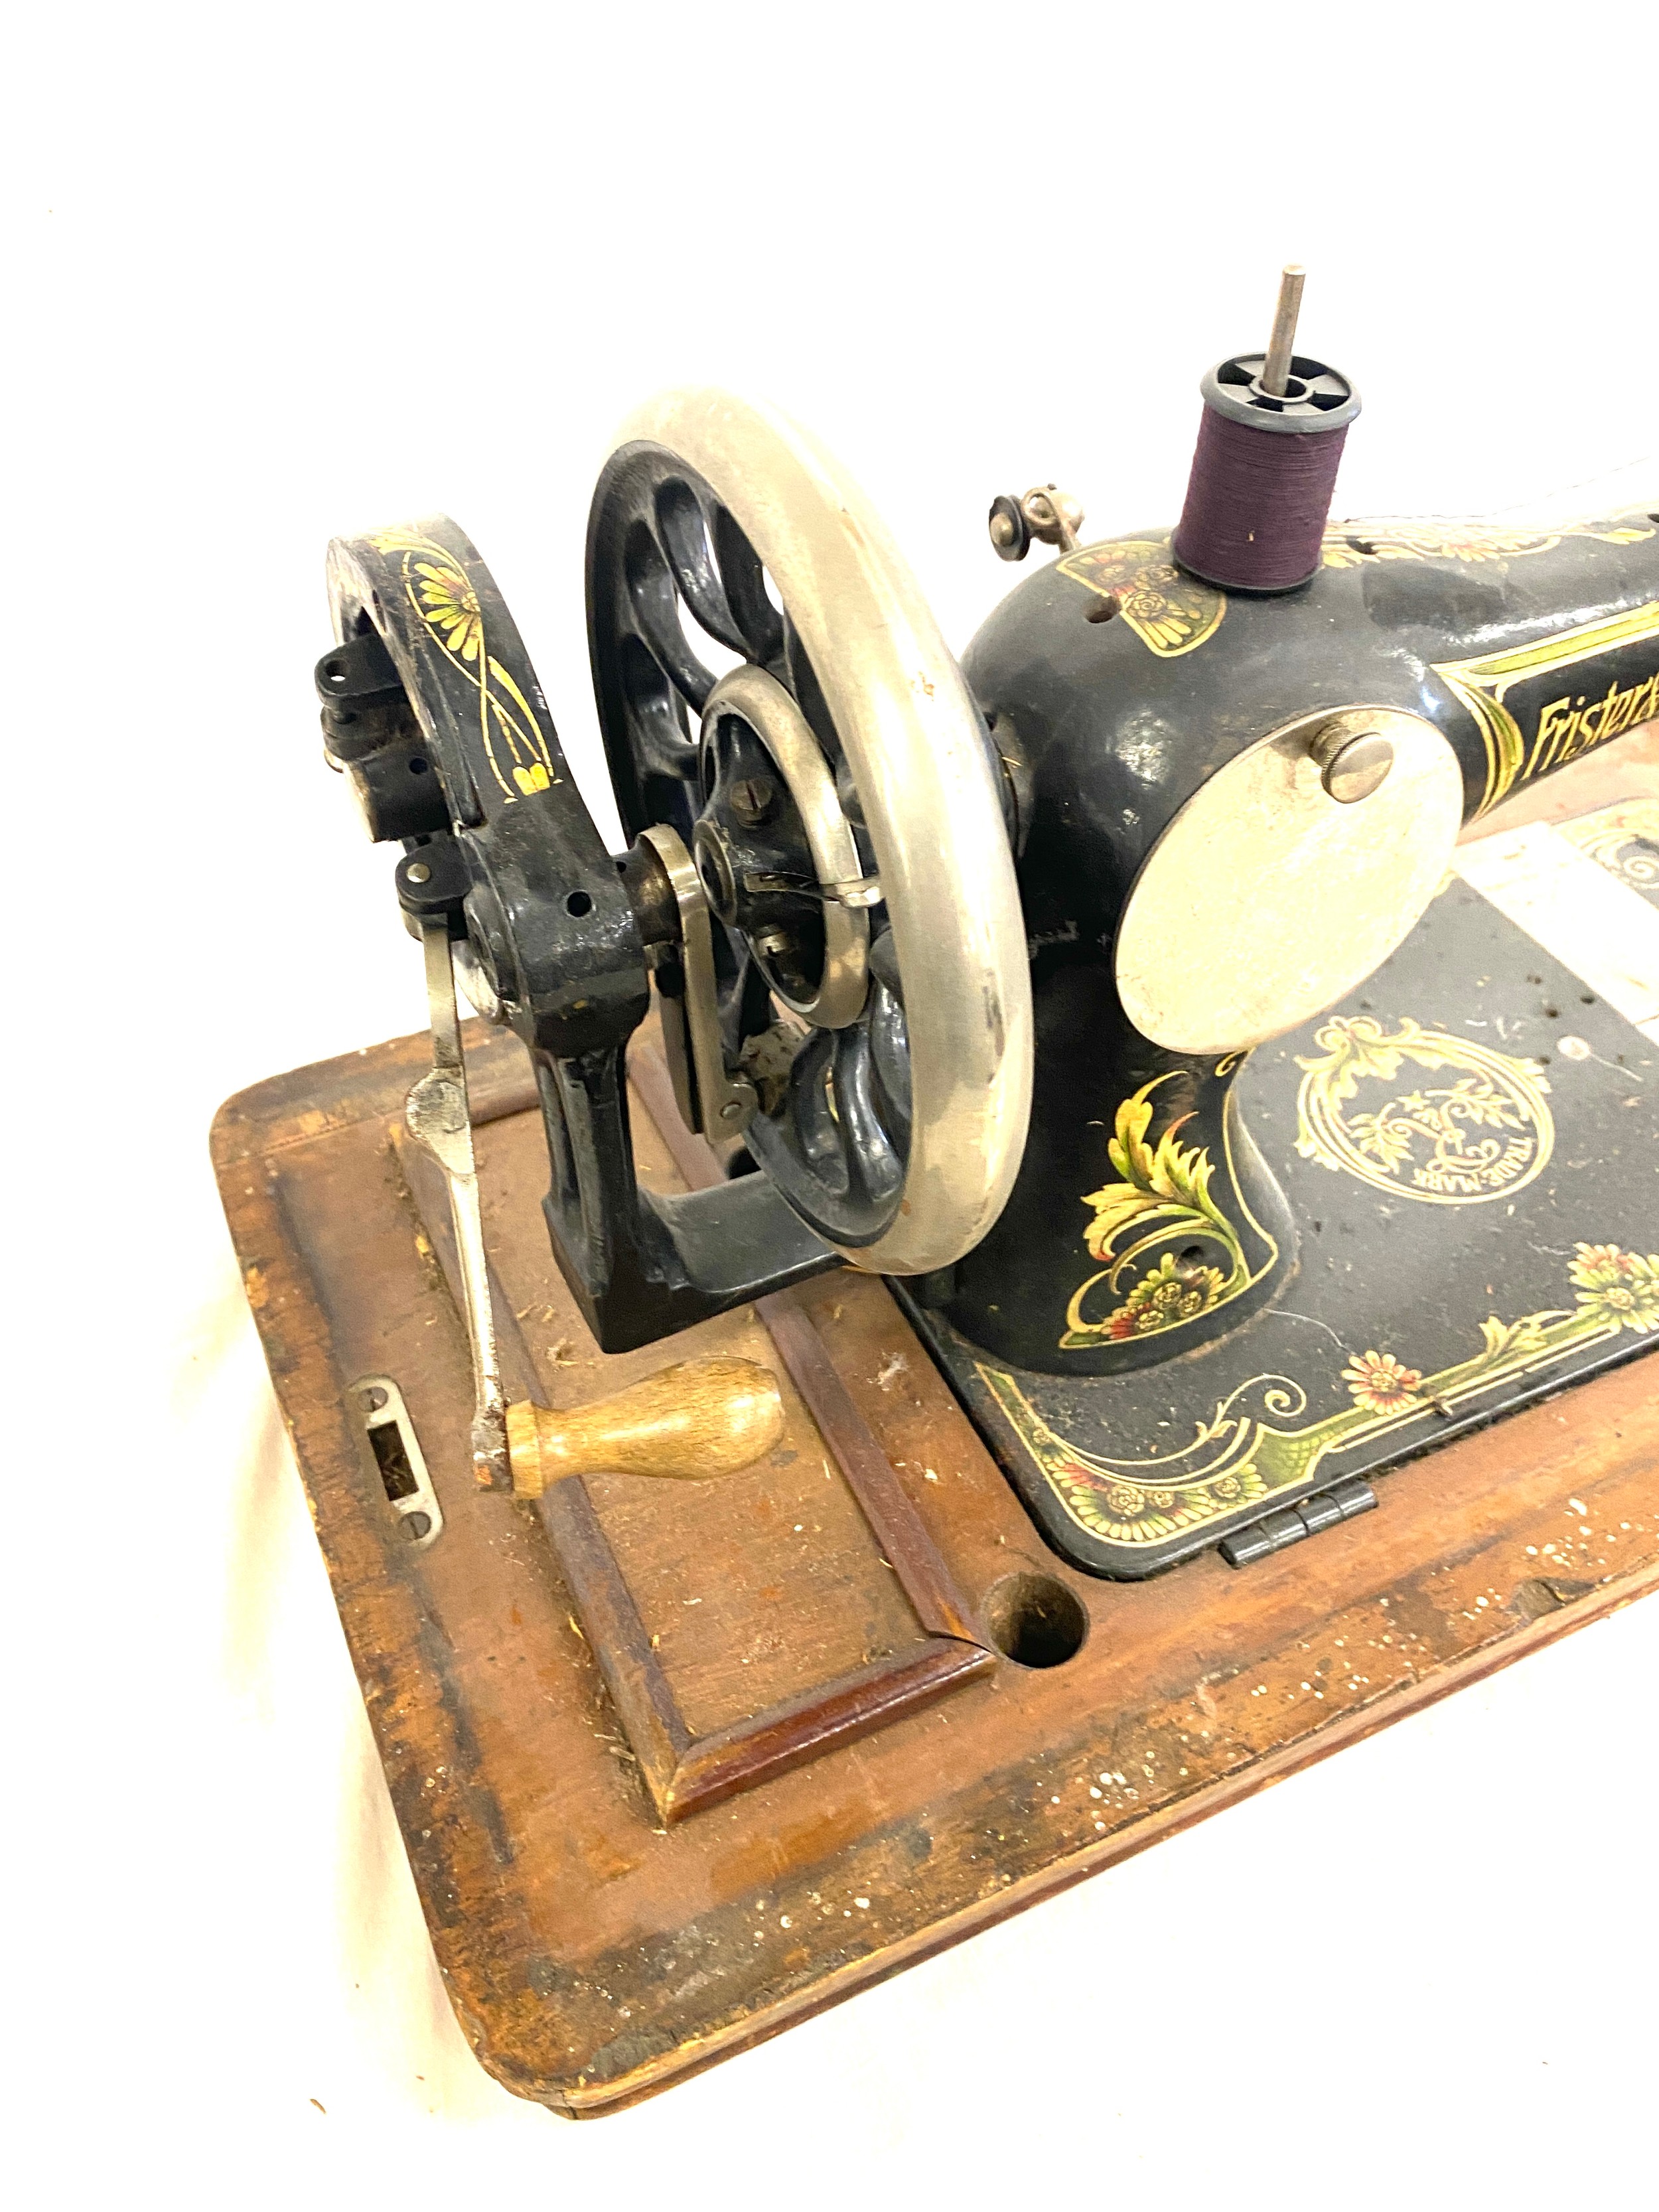 Vintage cased Frister and Rossmann sewing machine - Image 3 of 4